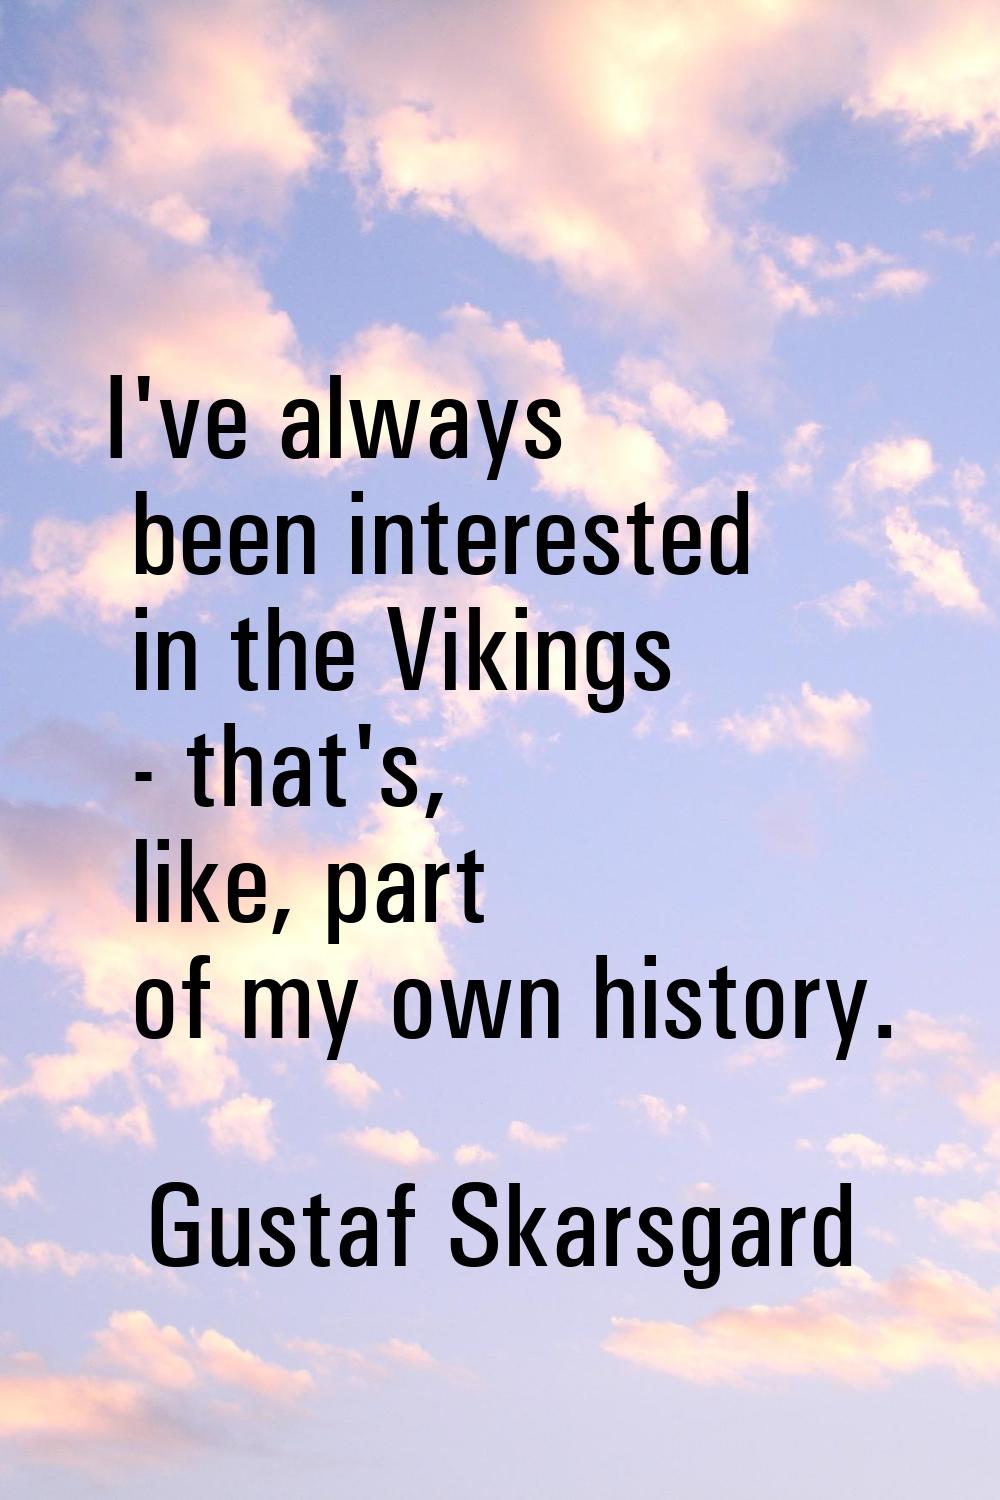 I've always been interested in the Vikings - that's, like, part of my own history.